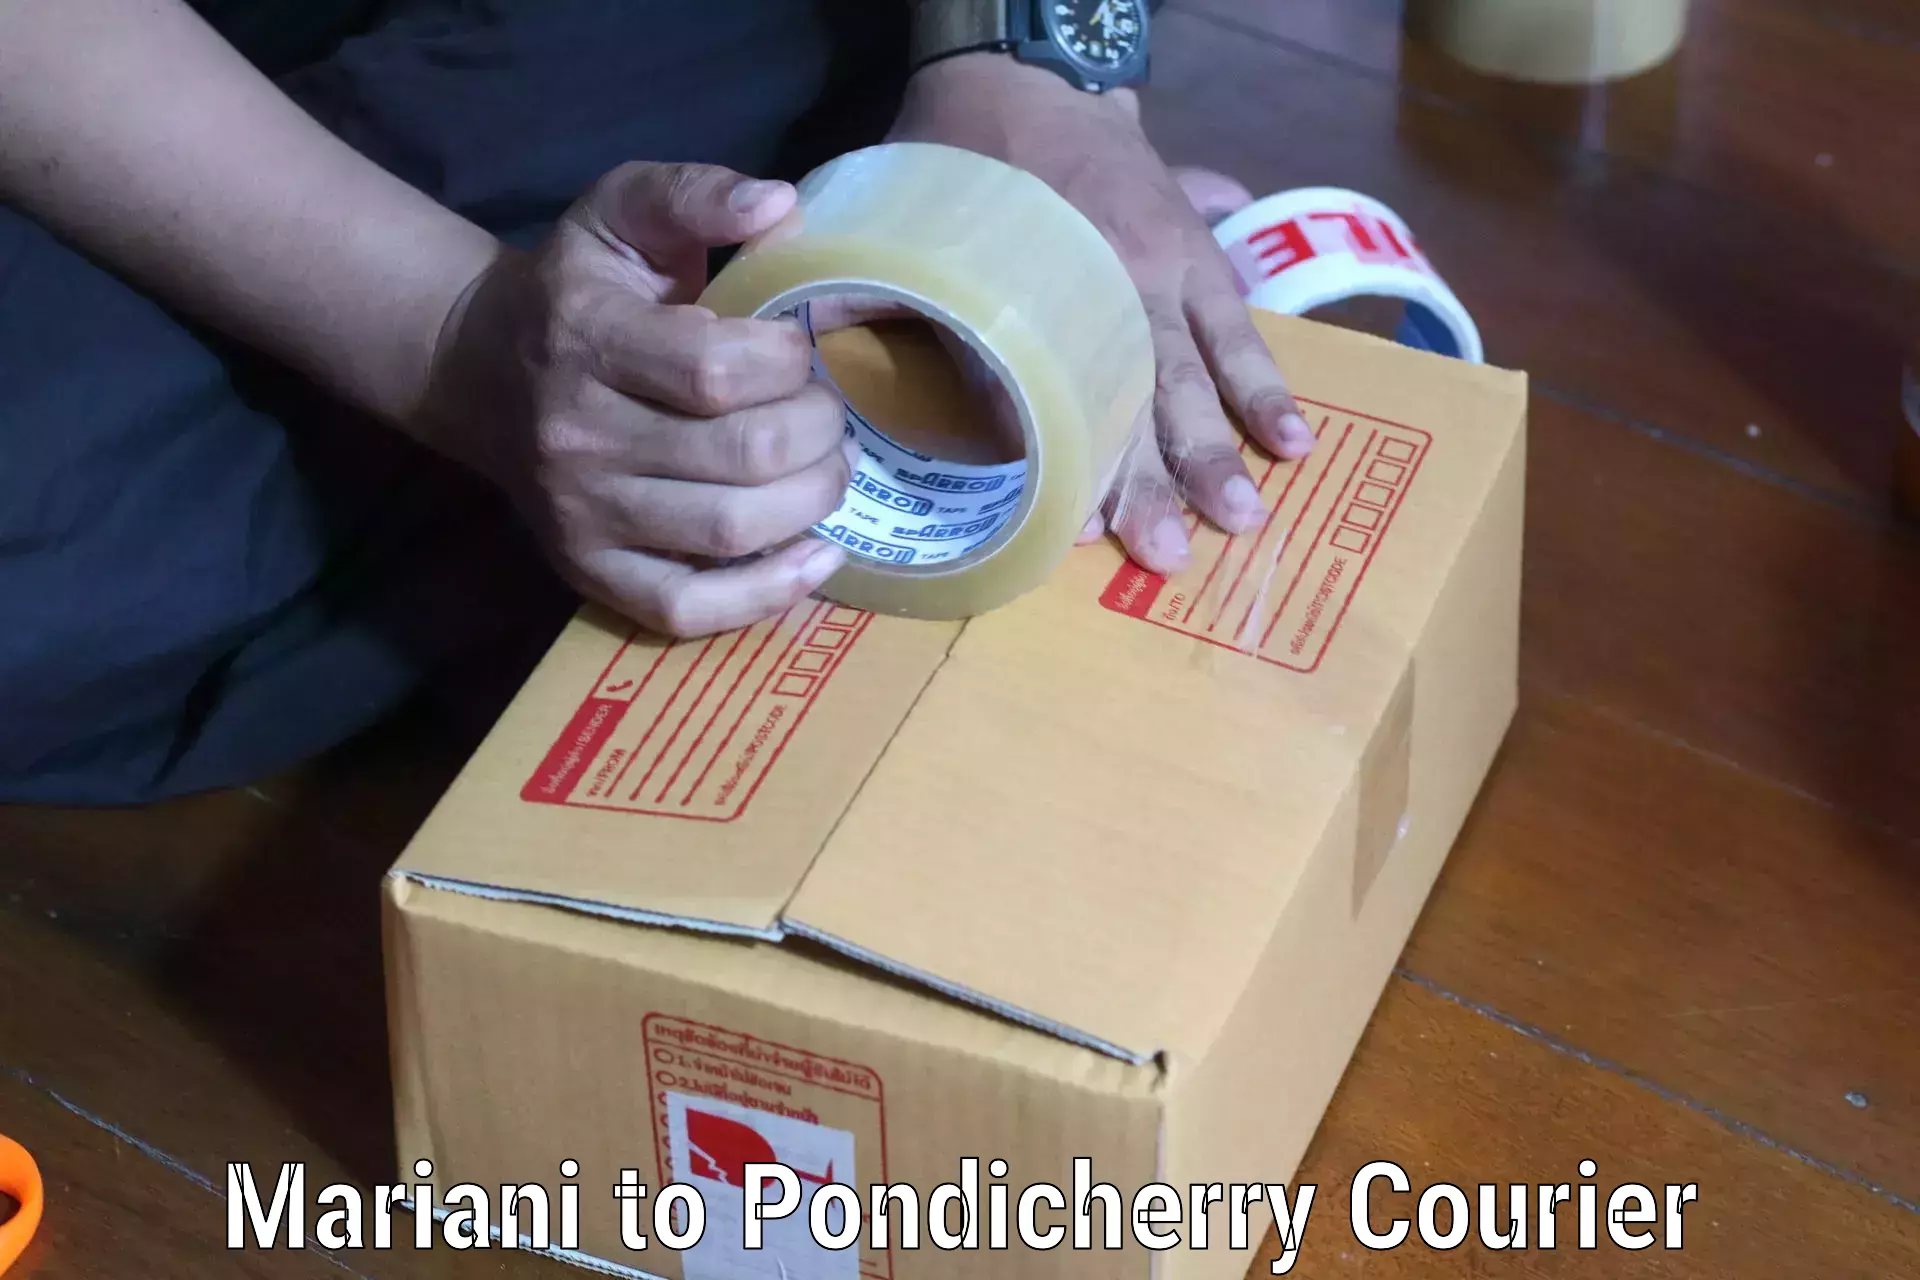 Cash on delivery service Mariani to Pondicherry